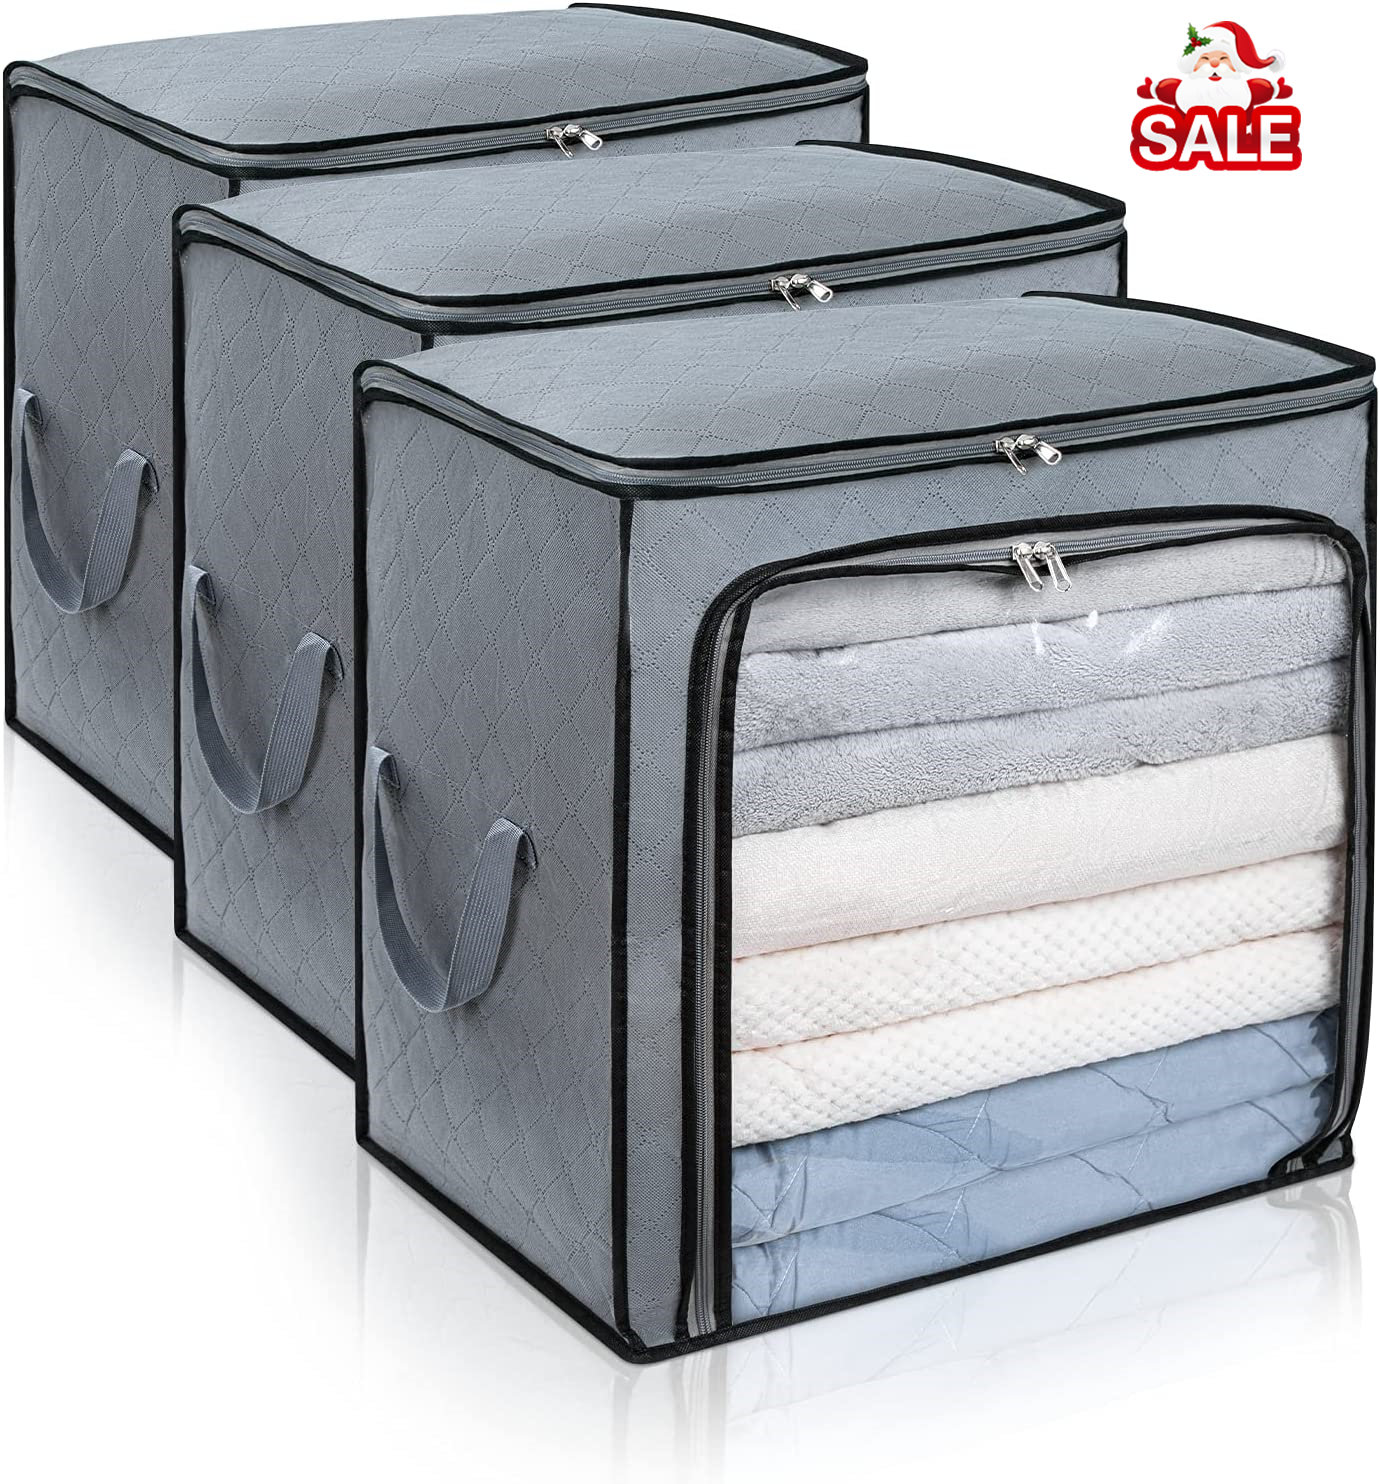 Rebrilliant 100L Large Capacity Clothes Storage Bag,3 Packs Foldable Closet  Organizers For Comforters, Blankets, Bedding, Clothes Storage Bins With  Reinforced Handle, Sturdy Zipper And Clear Window - Grey & Reviews